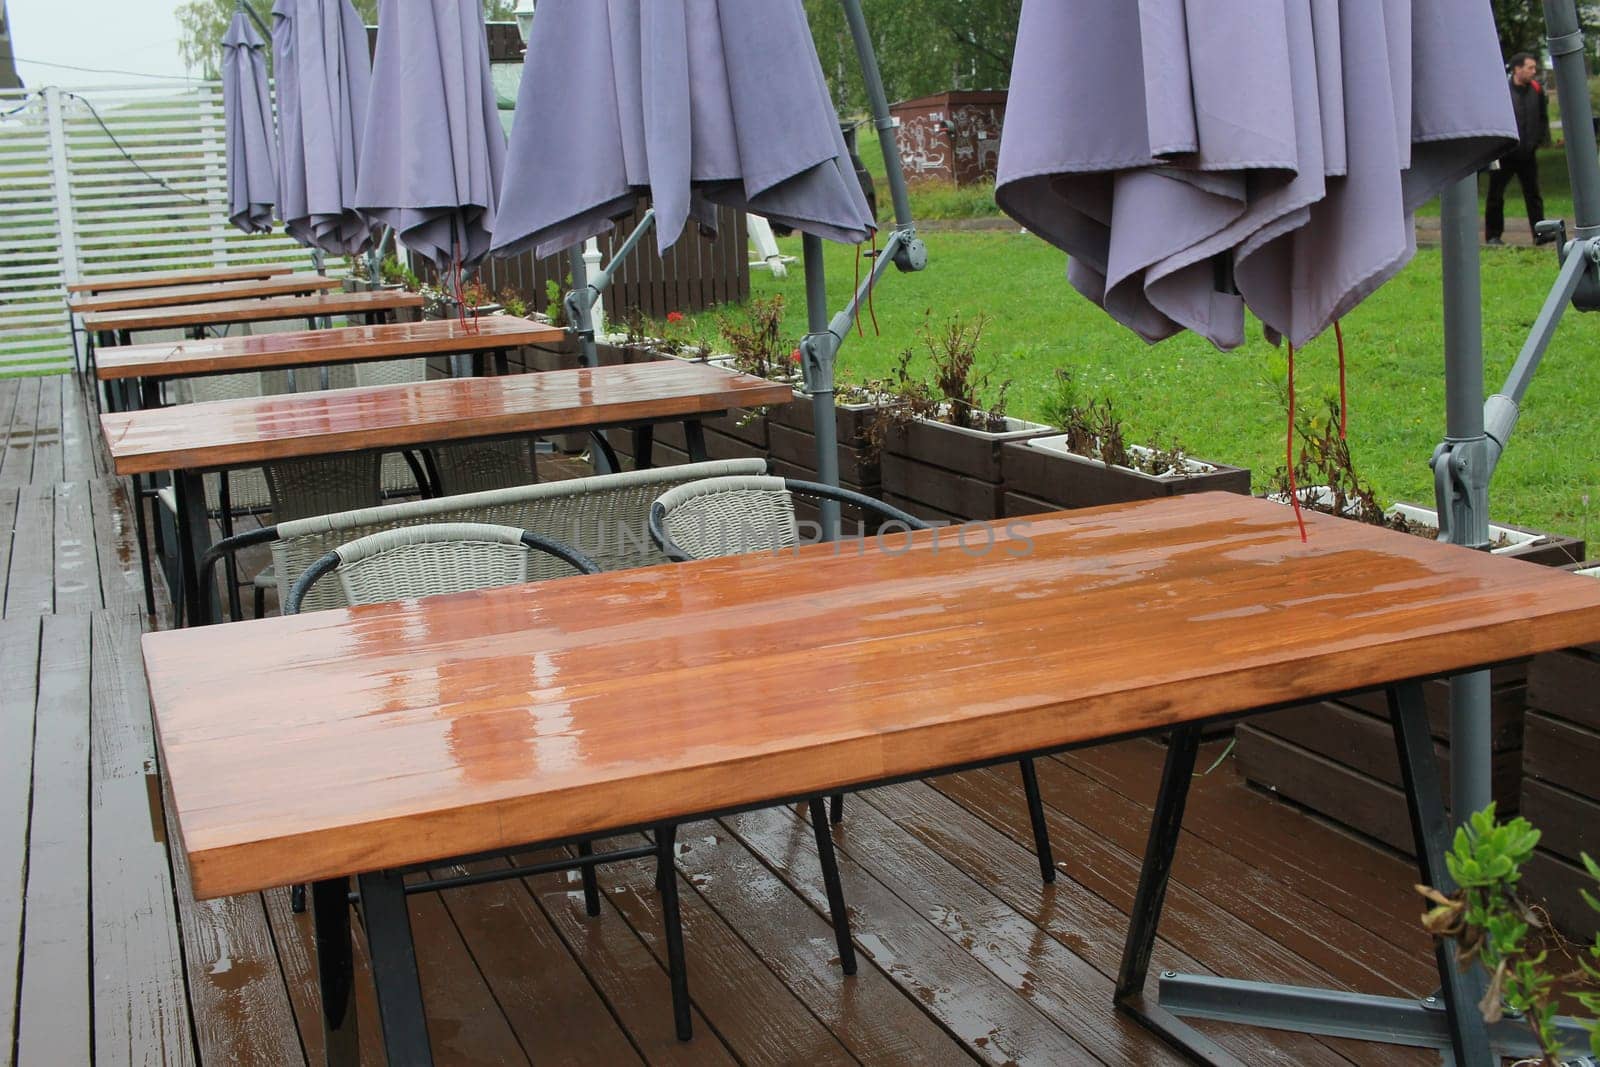 after the rain, outdoor cafe tables. A closed by electrovenik